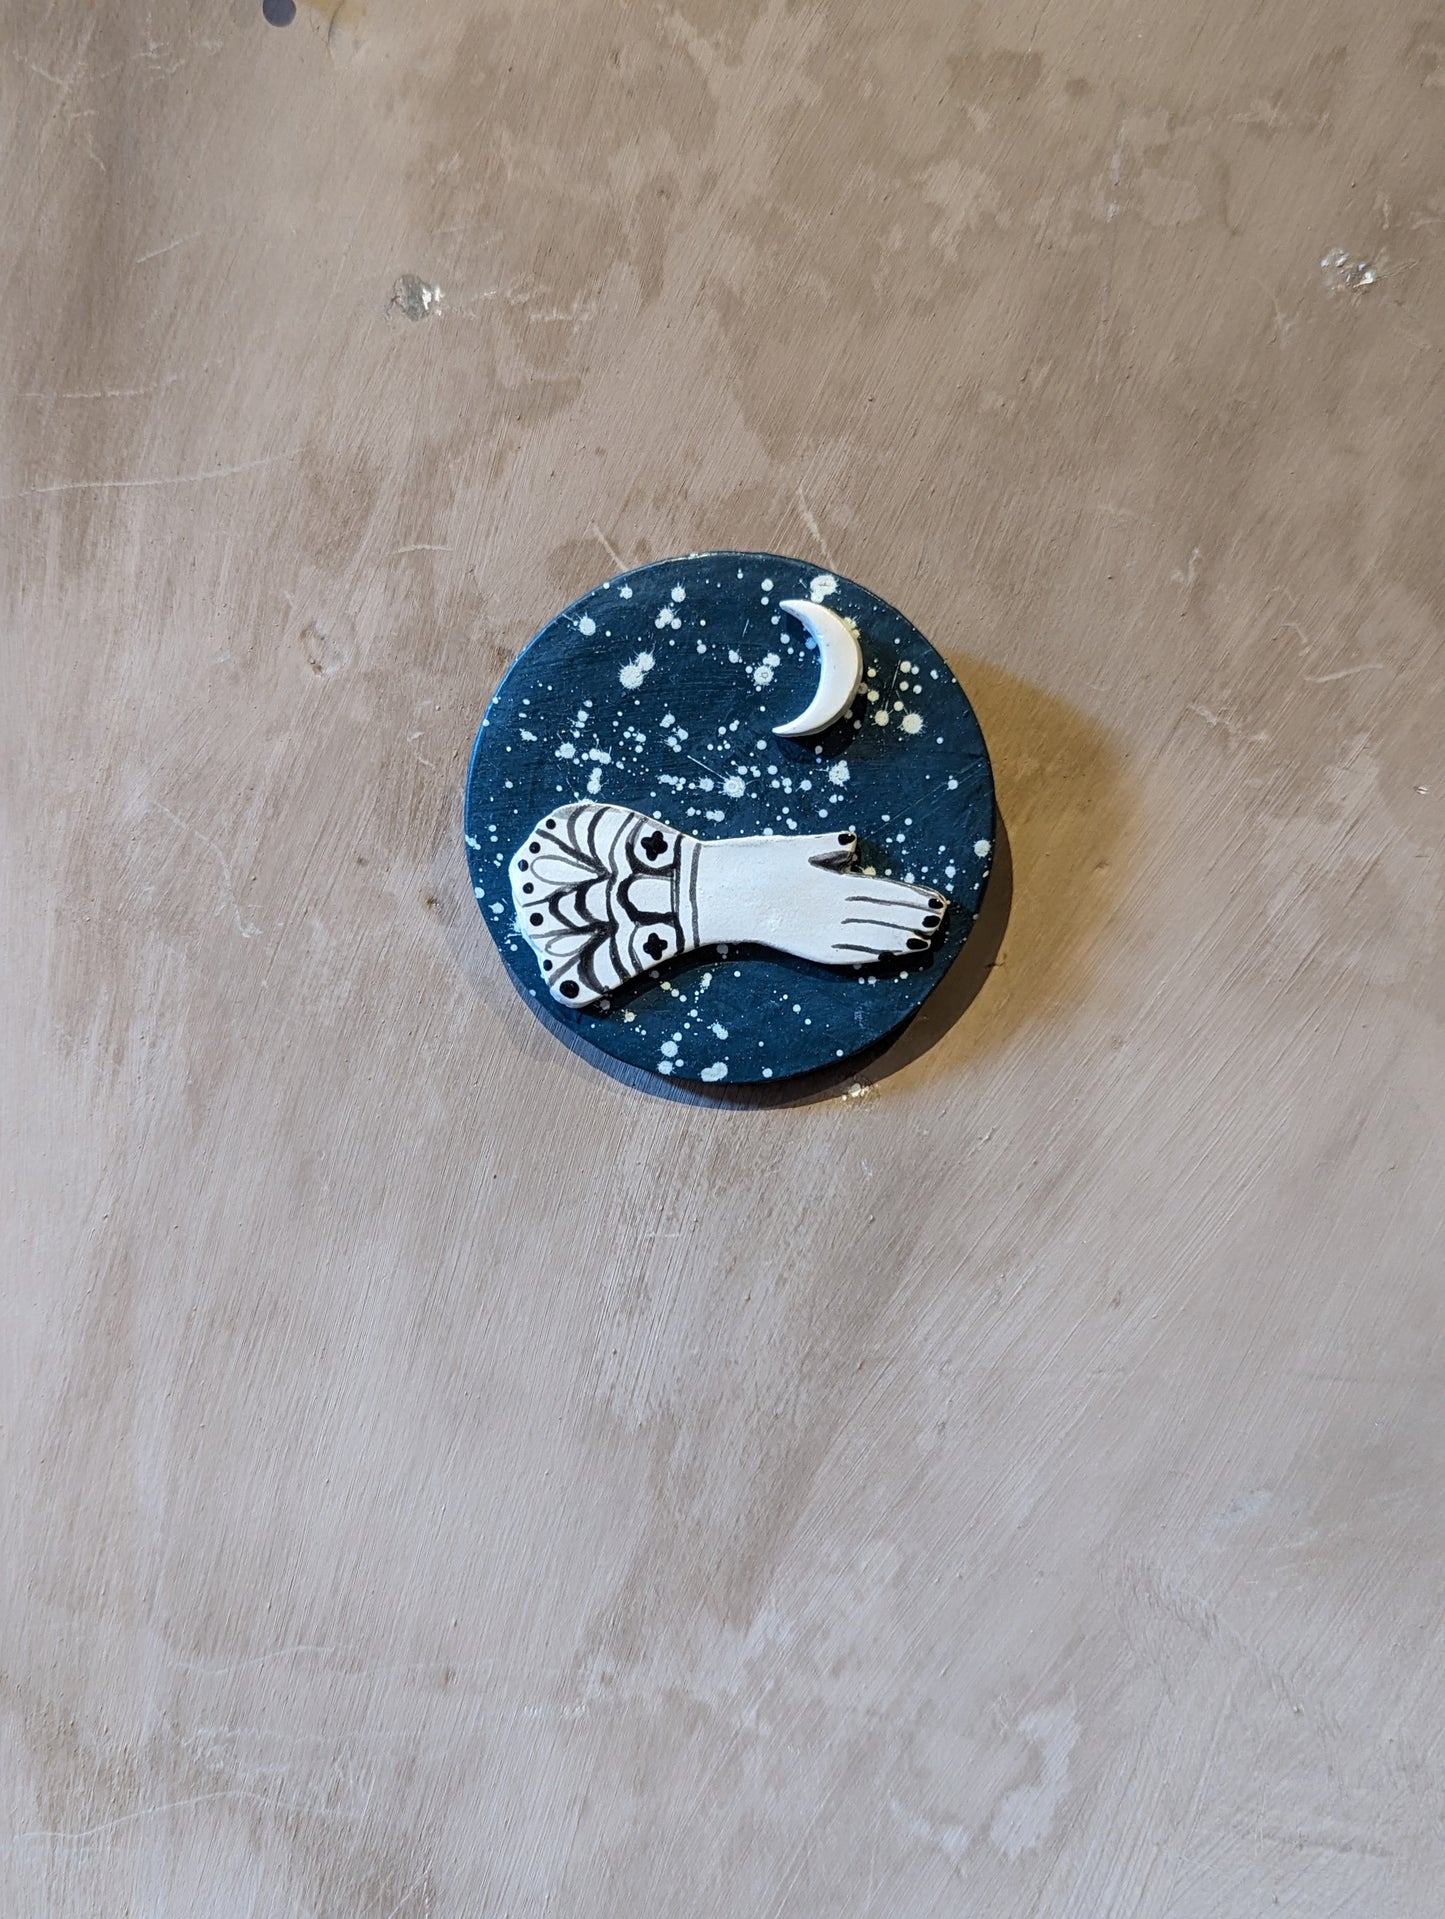 Draw Down the Moon (Miniature Plaque) by Ciara Veronica Dunne